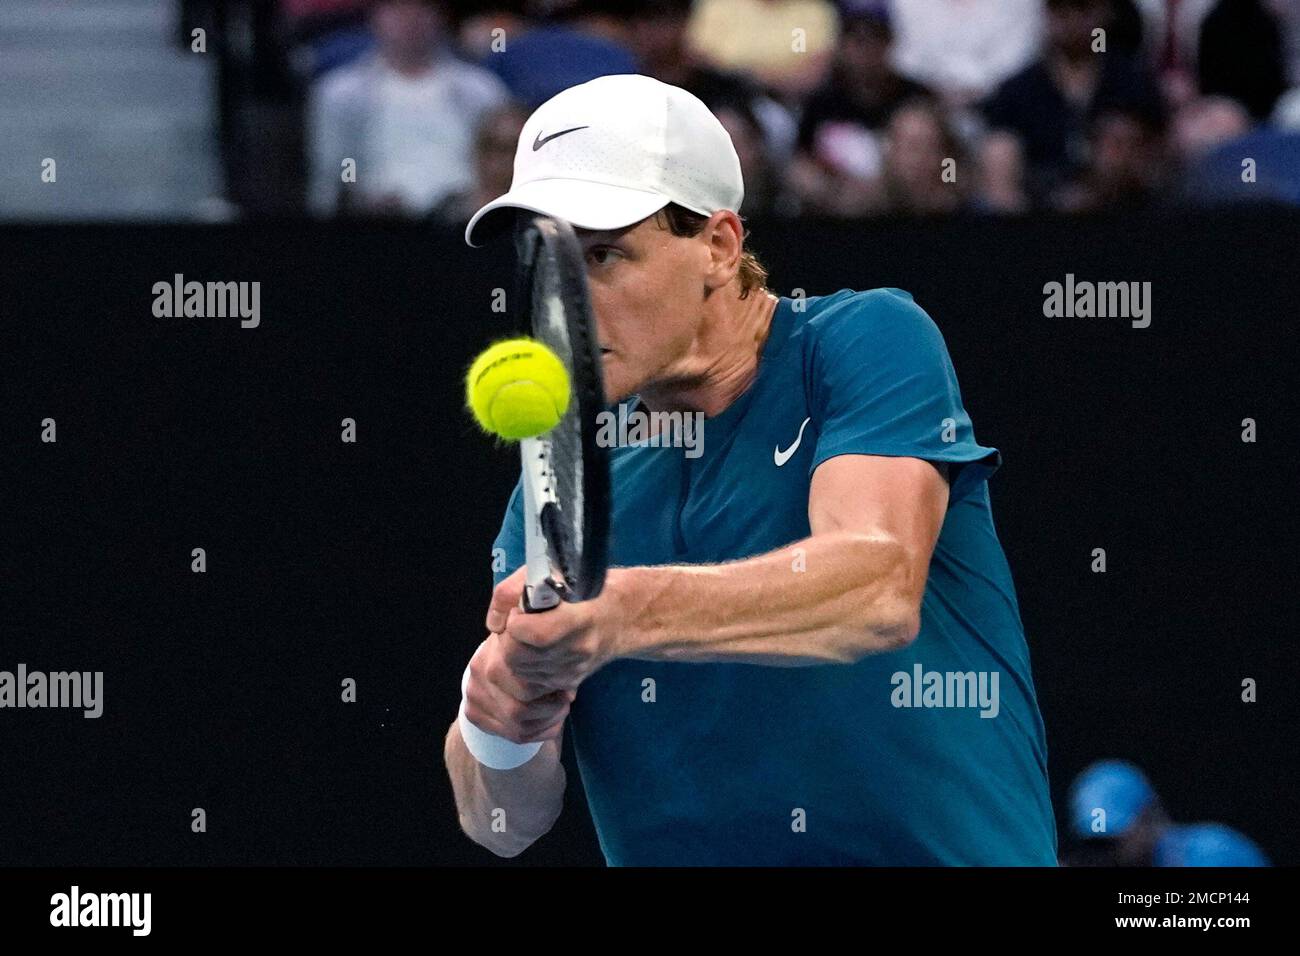 Jannik Sinner of Italy plays a backhand return to Stefanos Tsitsipas of Greece during their fourth round match at the Australian Open tennis championship in Melbourne, Australia, Sunday, Jan